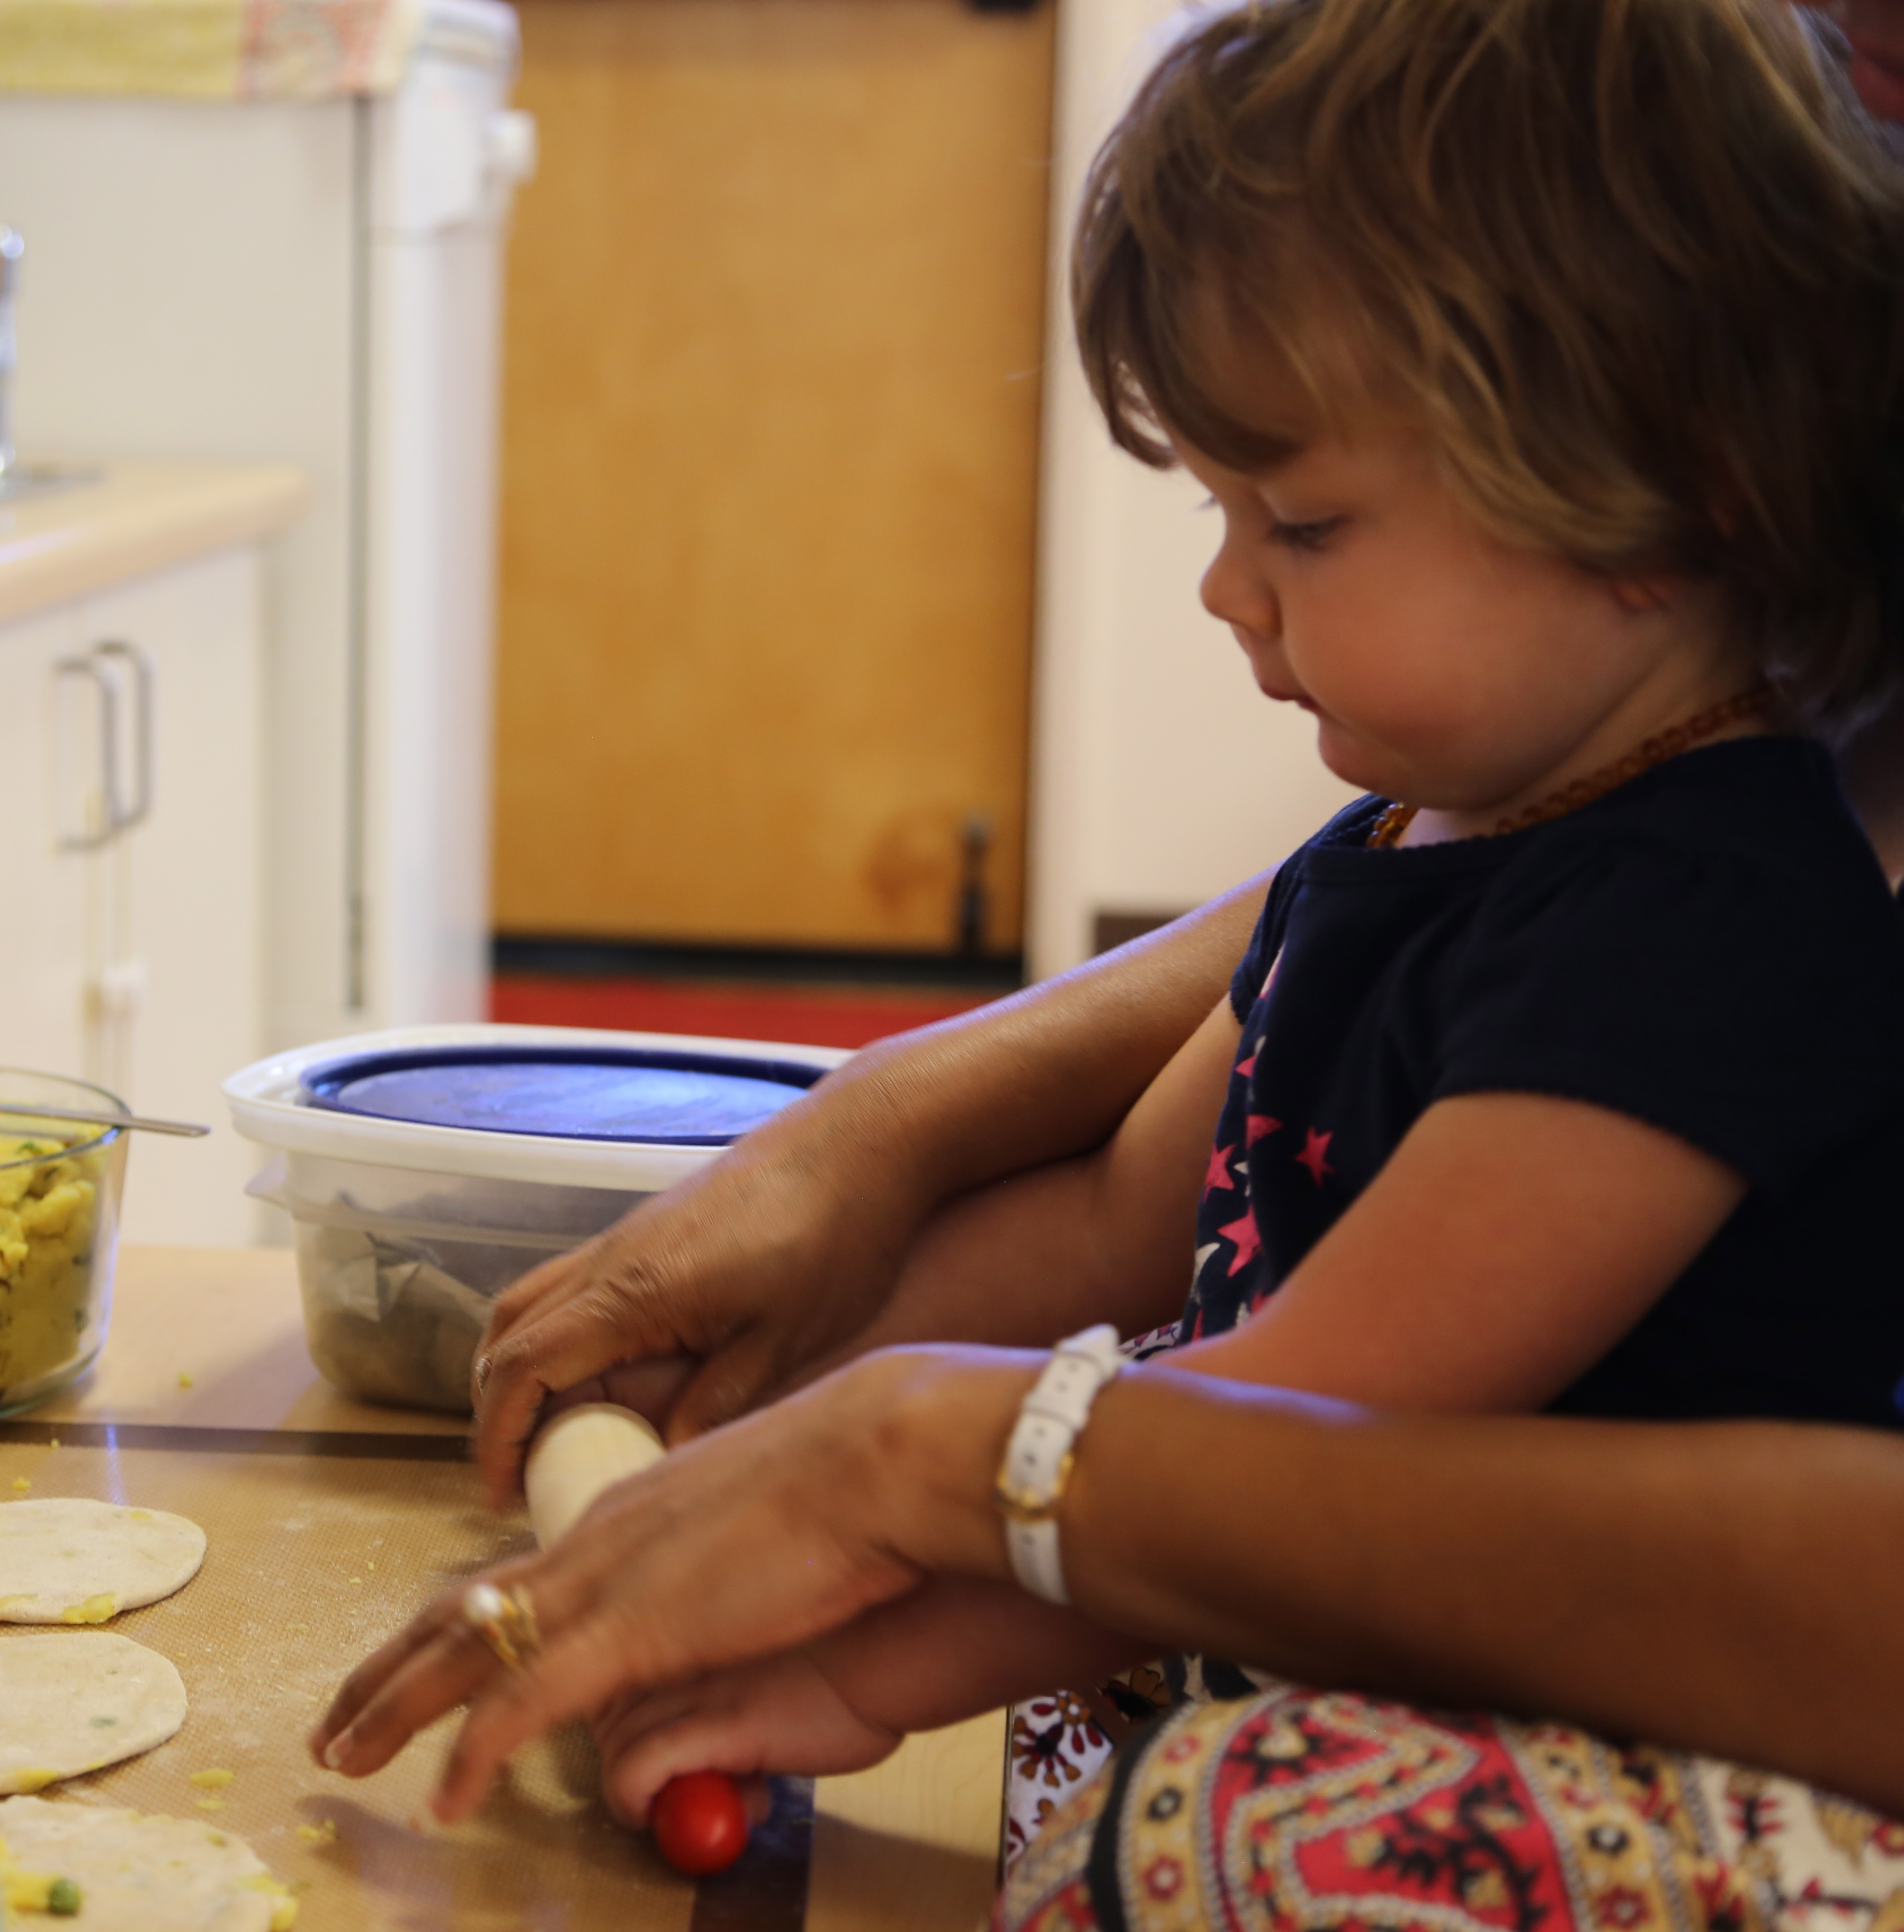 Toddler using a rolling pin while teacher guides her in a Montessori classroom